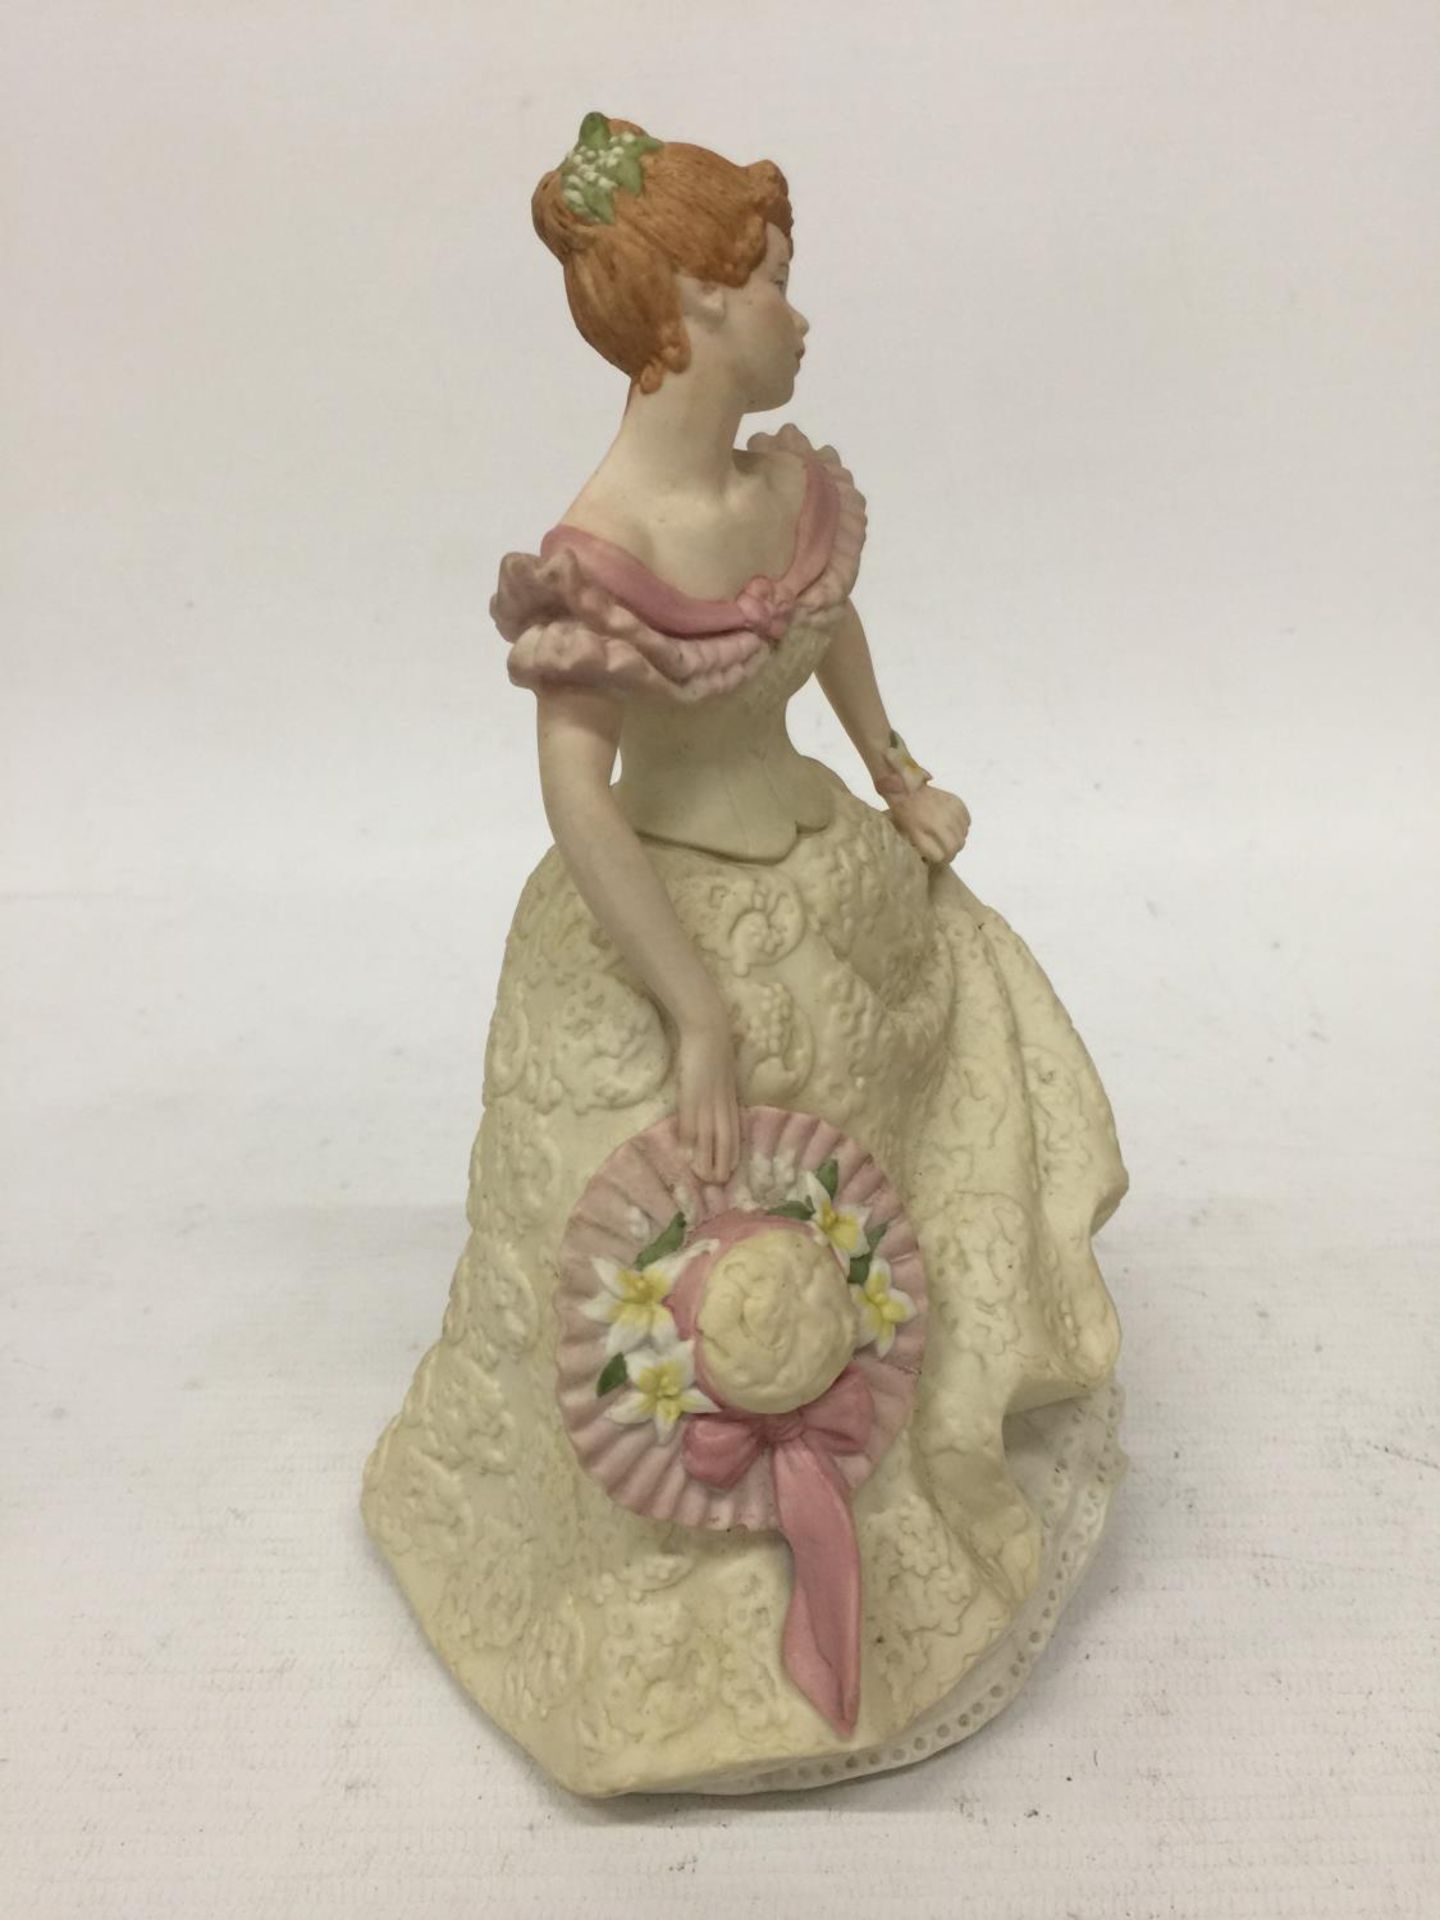 A WEDGWOOD FIGURINE "LILY" - 21 CM - Image 2 of 5